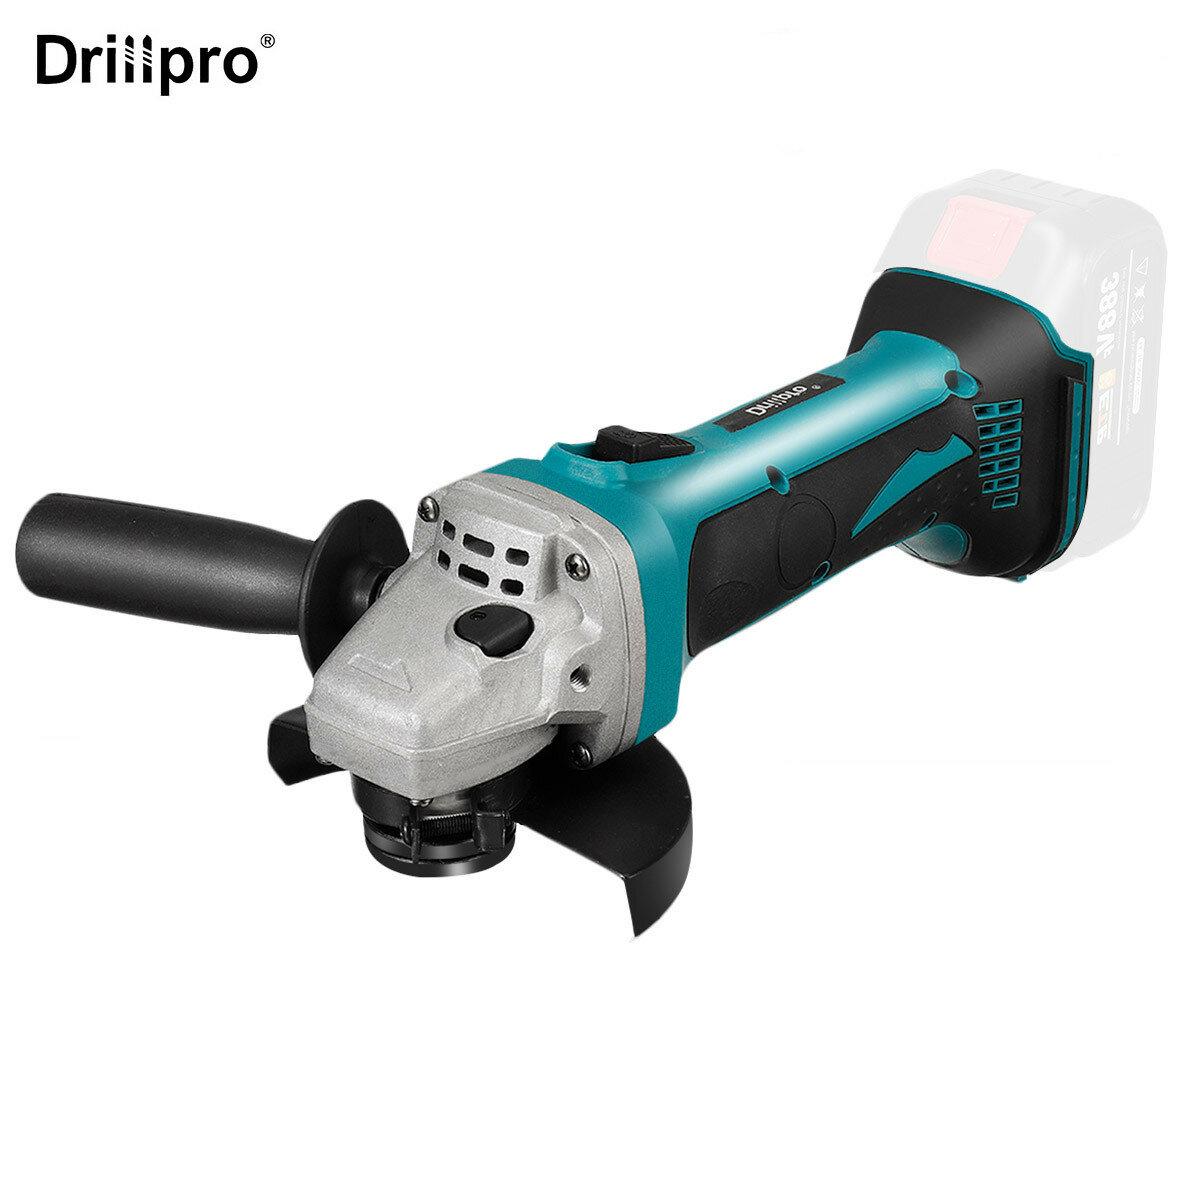 Image of Drillpro 388VF 125mm Blue+Balck Brushless Motor 8500rpm 800W Compact Lithium Electric Polisher